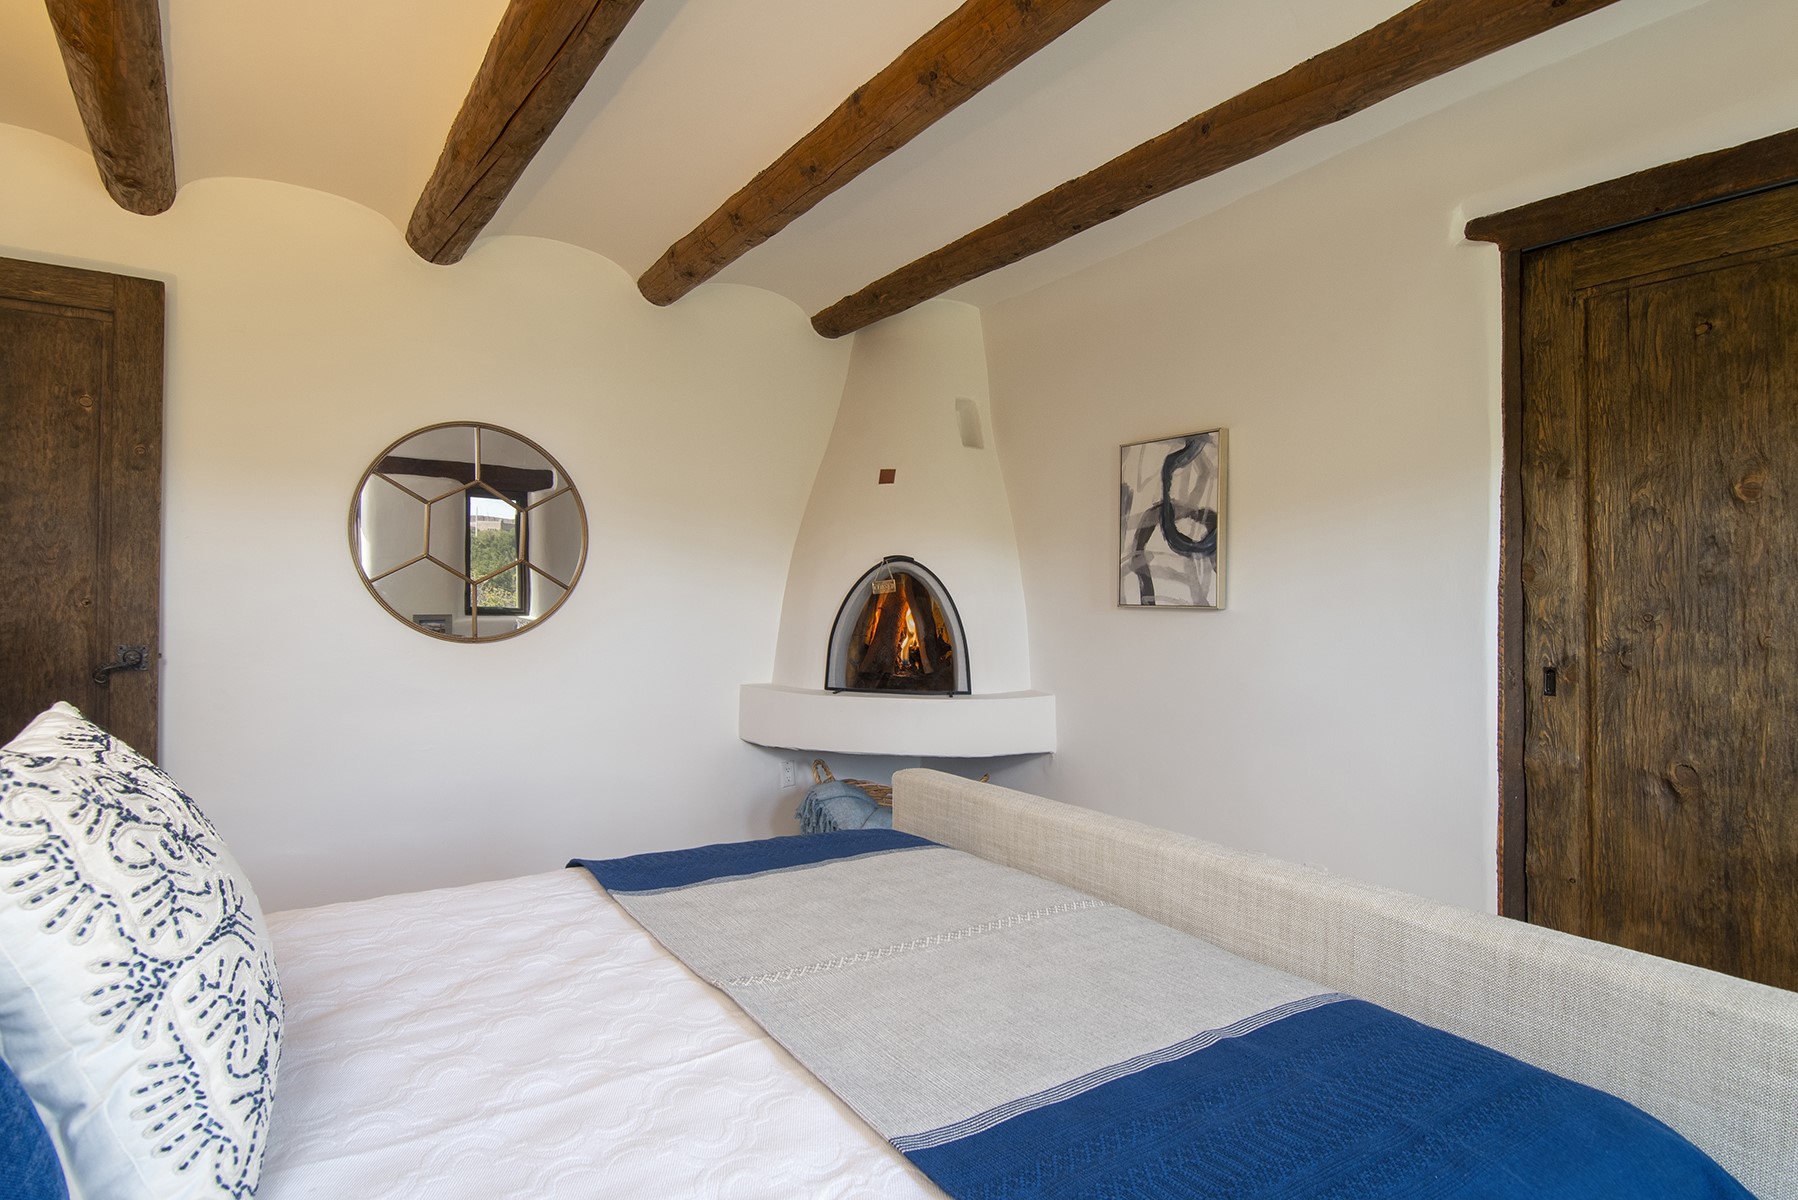 Guest Bedroom with kiva fireplace